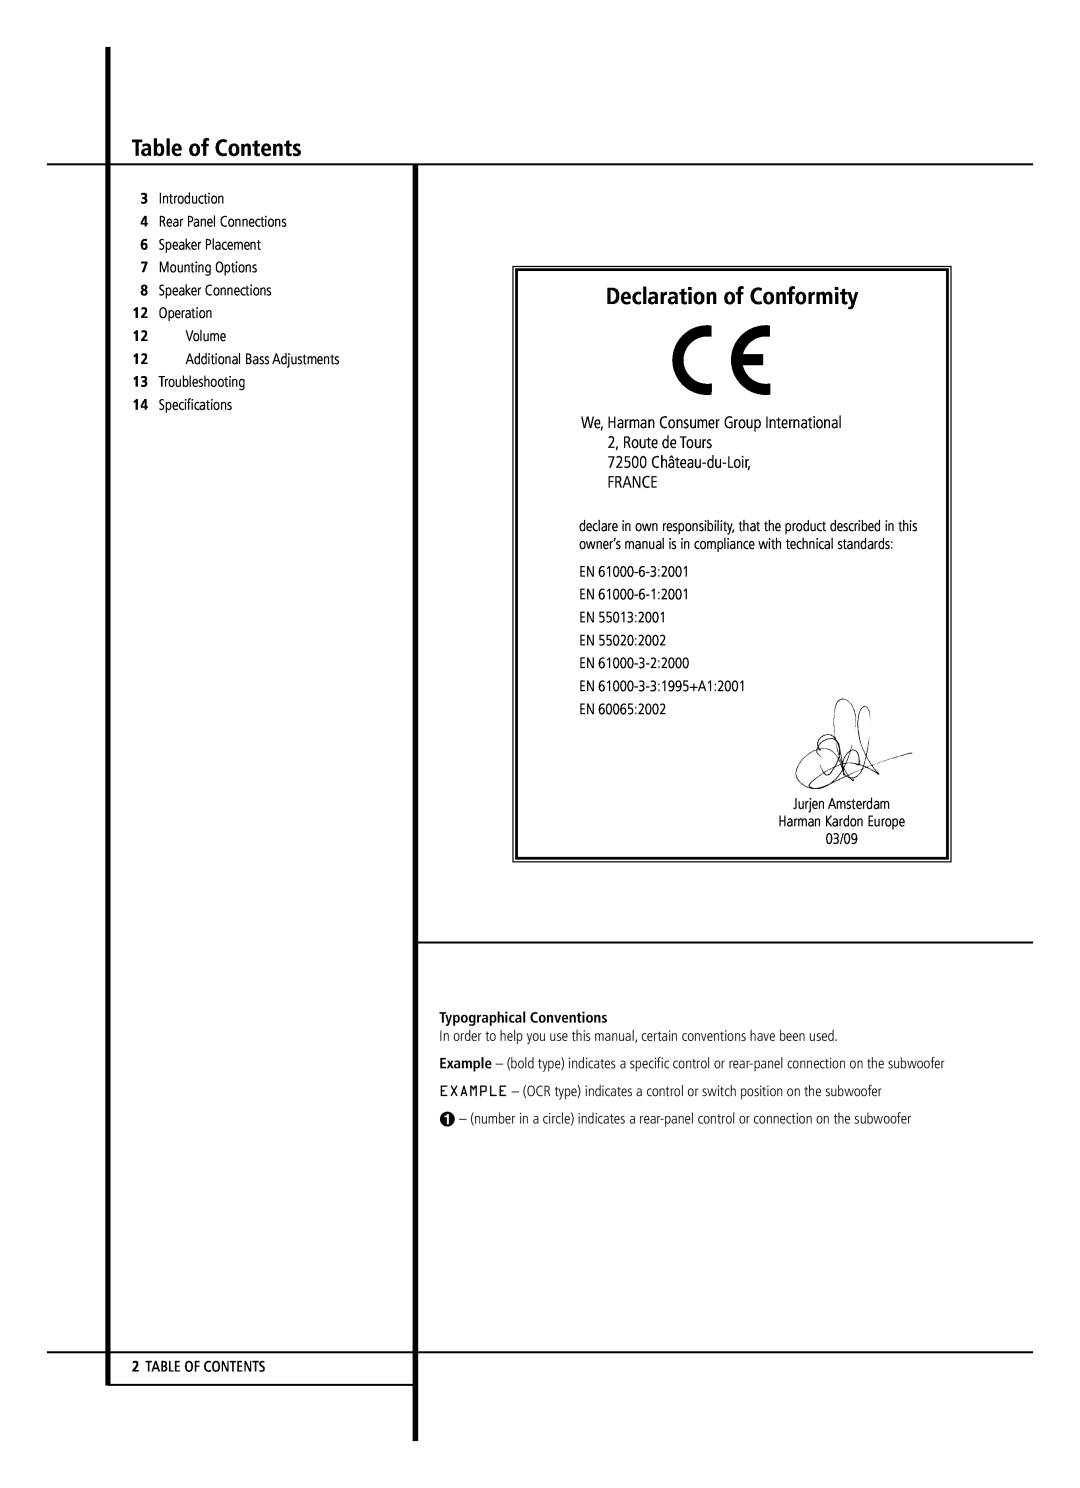 Harman-Kardon HKTS 2 owner manual Table of Contents, Declaration of Conformity, Typographical Conventions 